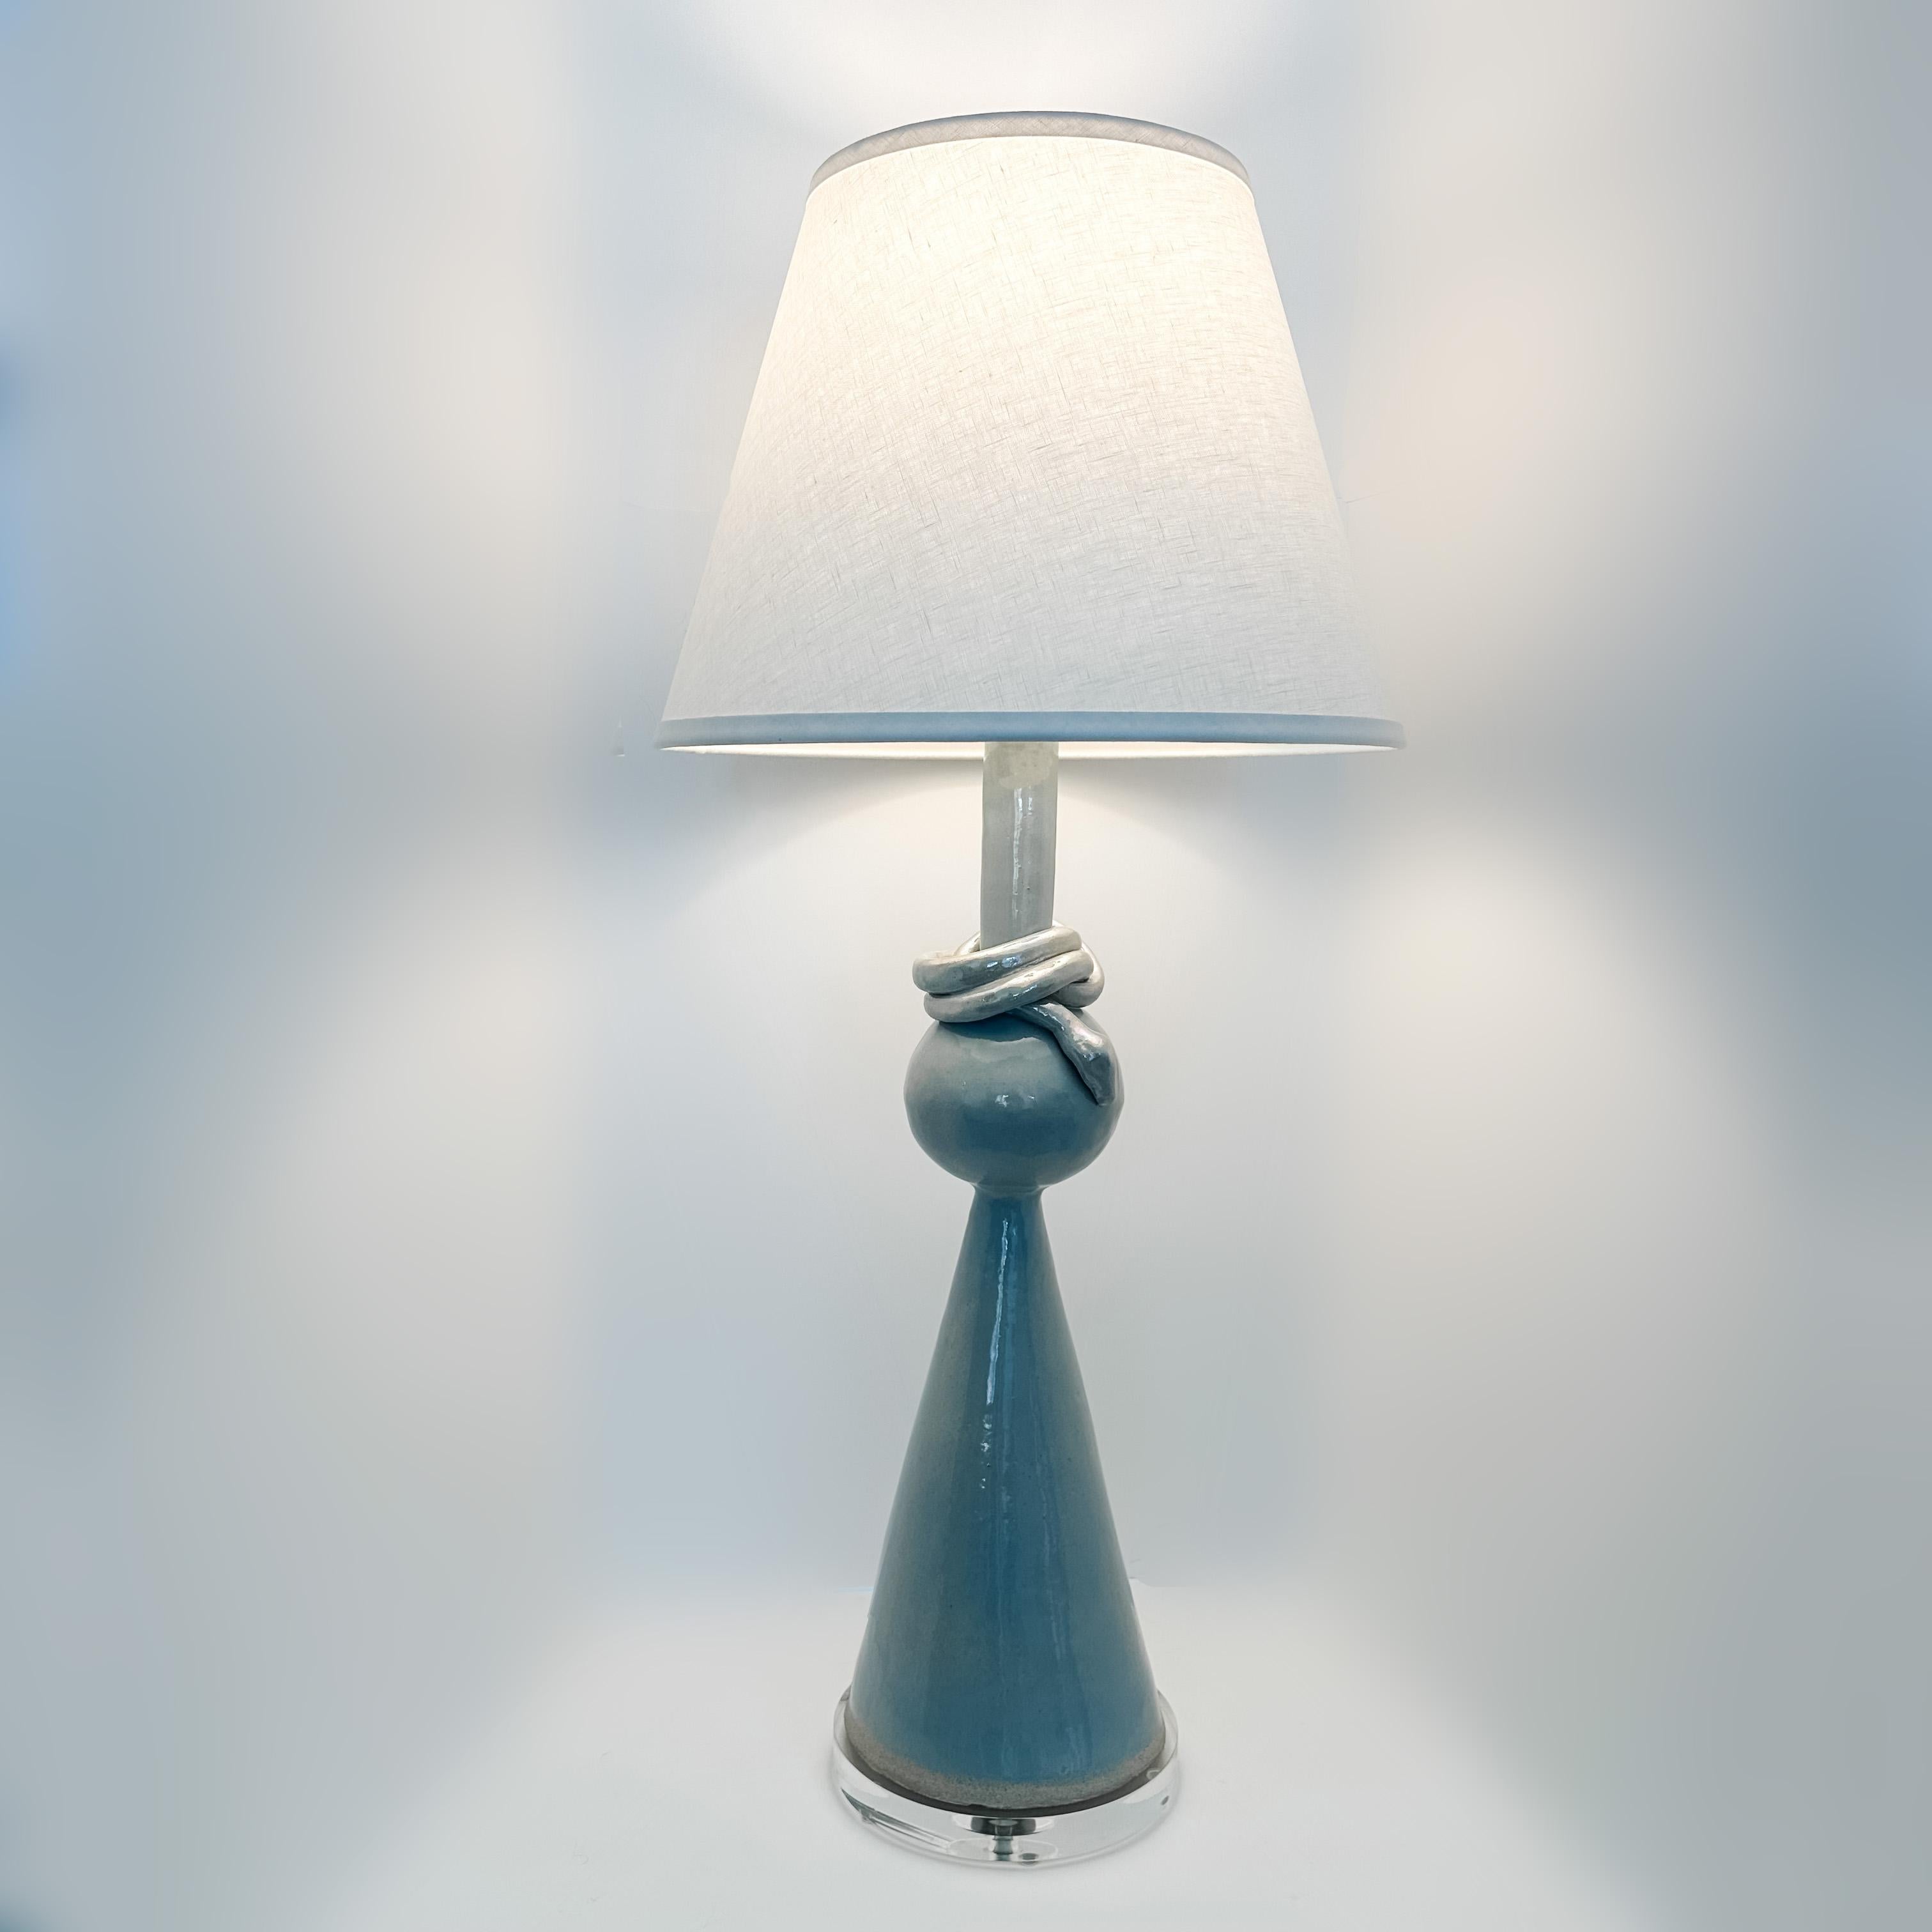 Modern Geo Table Lamp with Serpent Twist in Wedgwood Glaze on Lucite Base For Sale